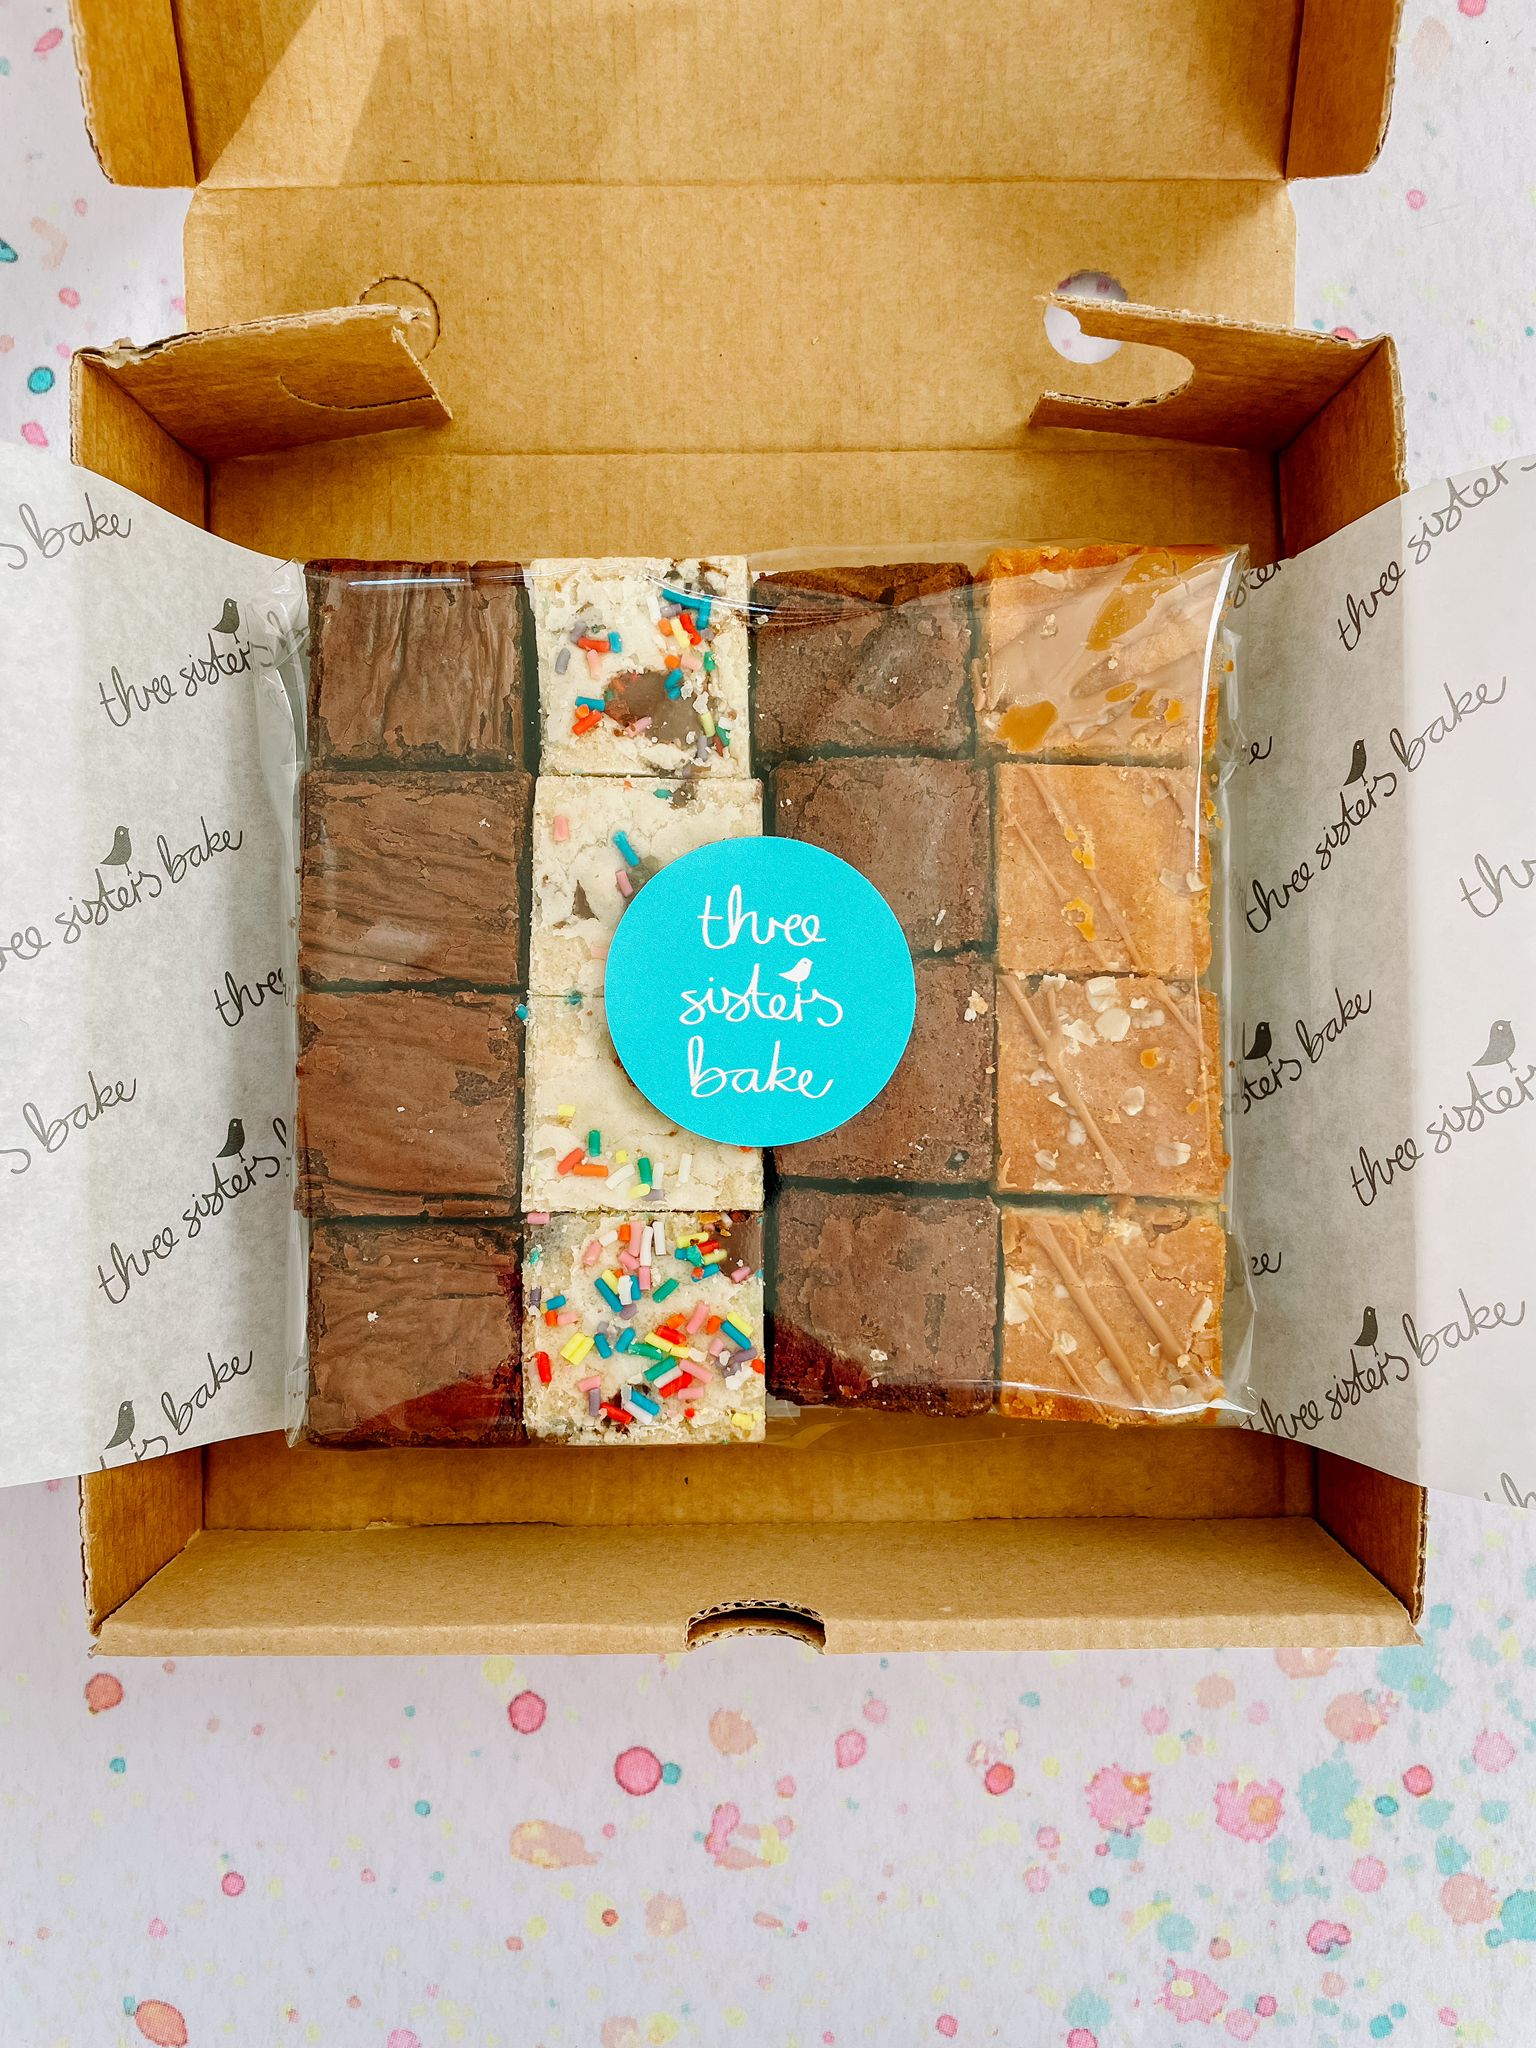 Bestsellers Cake Box – Small